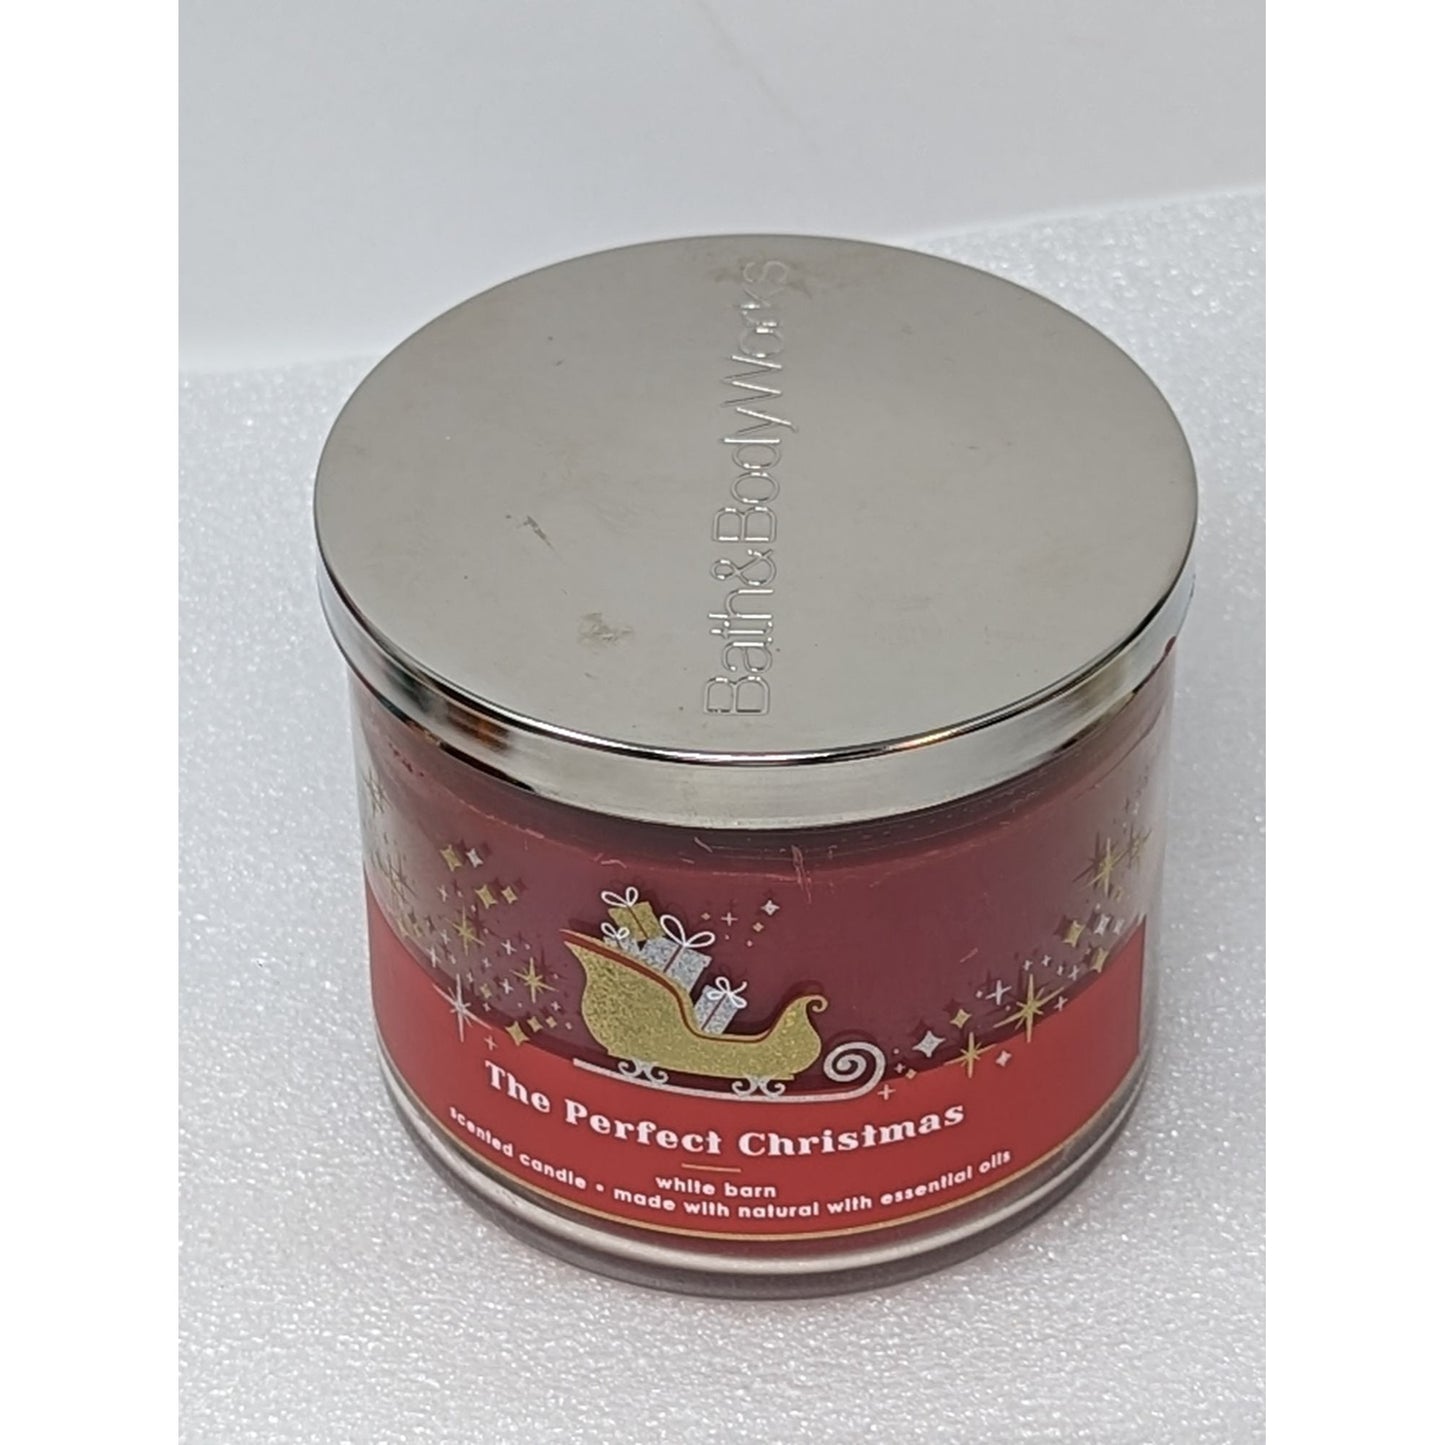 Bath & Body Works White Barn The Perfect Christmas 3 Wick Scented Candle